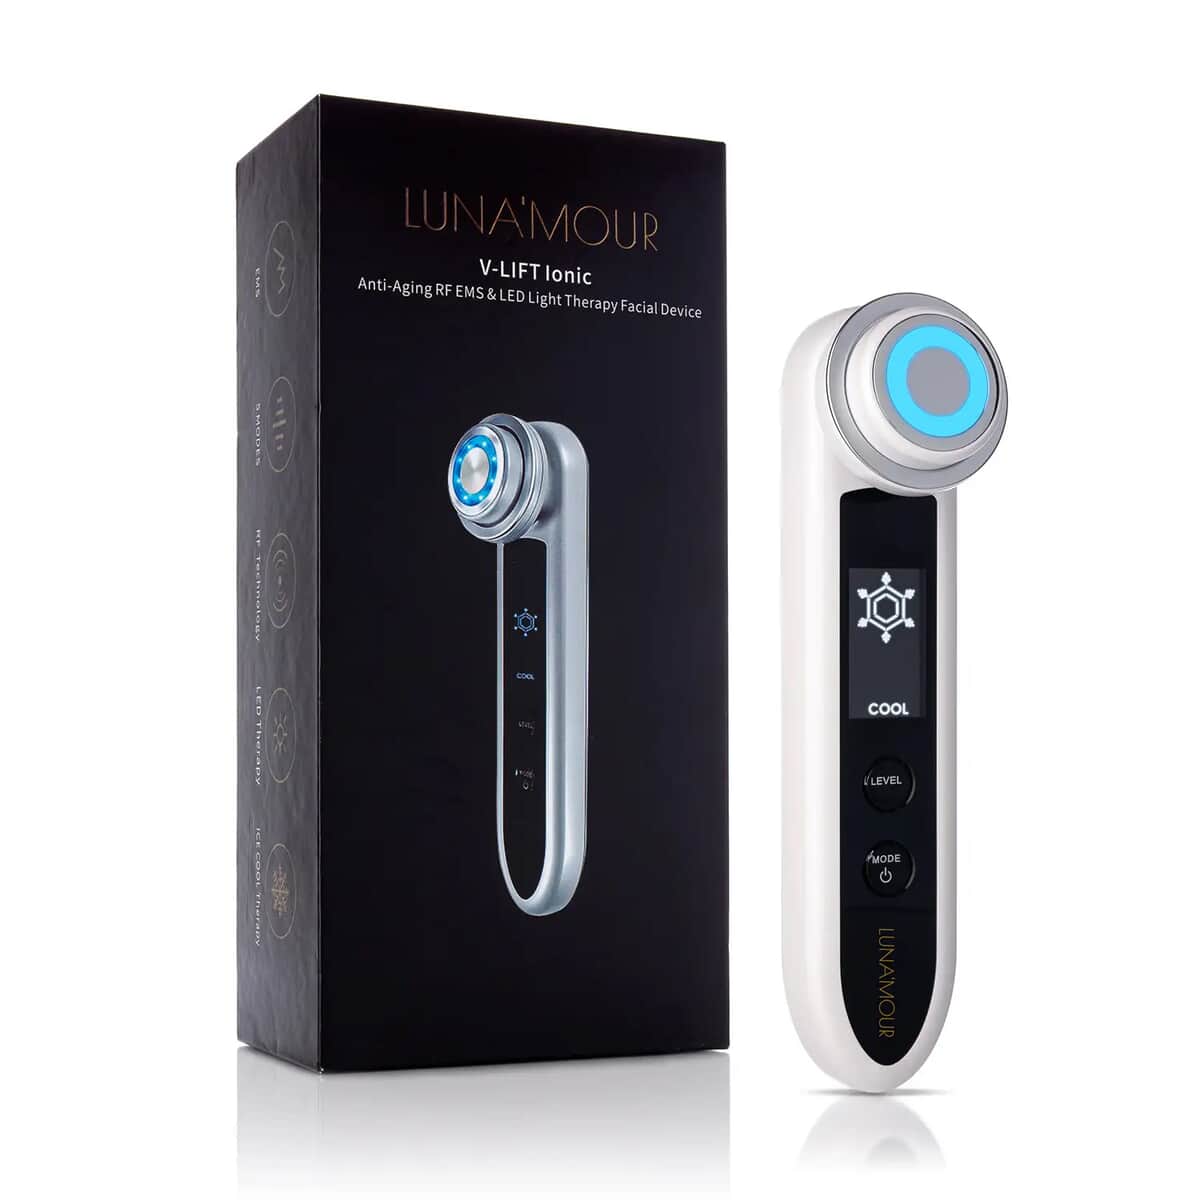 Luna'Mour V-Lift Ionic Anti-Aging RF EMS & LED Facial Device For Skin Tightening, Facial Beauty Skin Care Machine image number 0